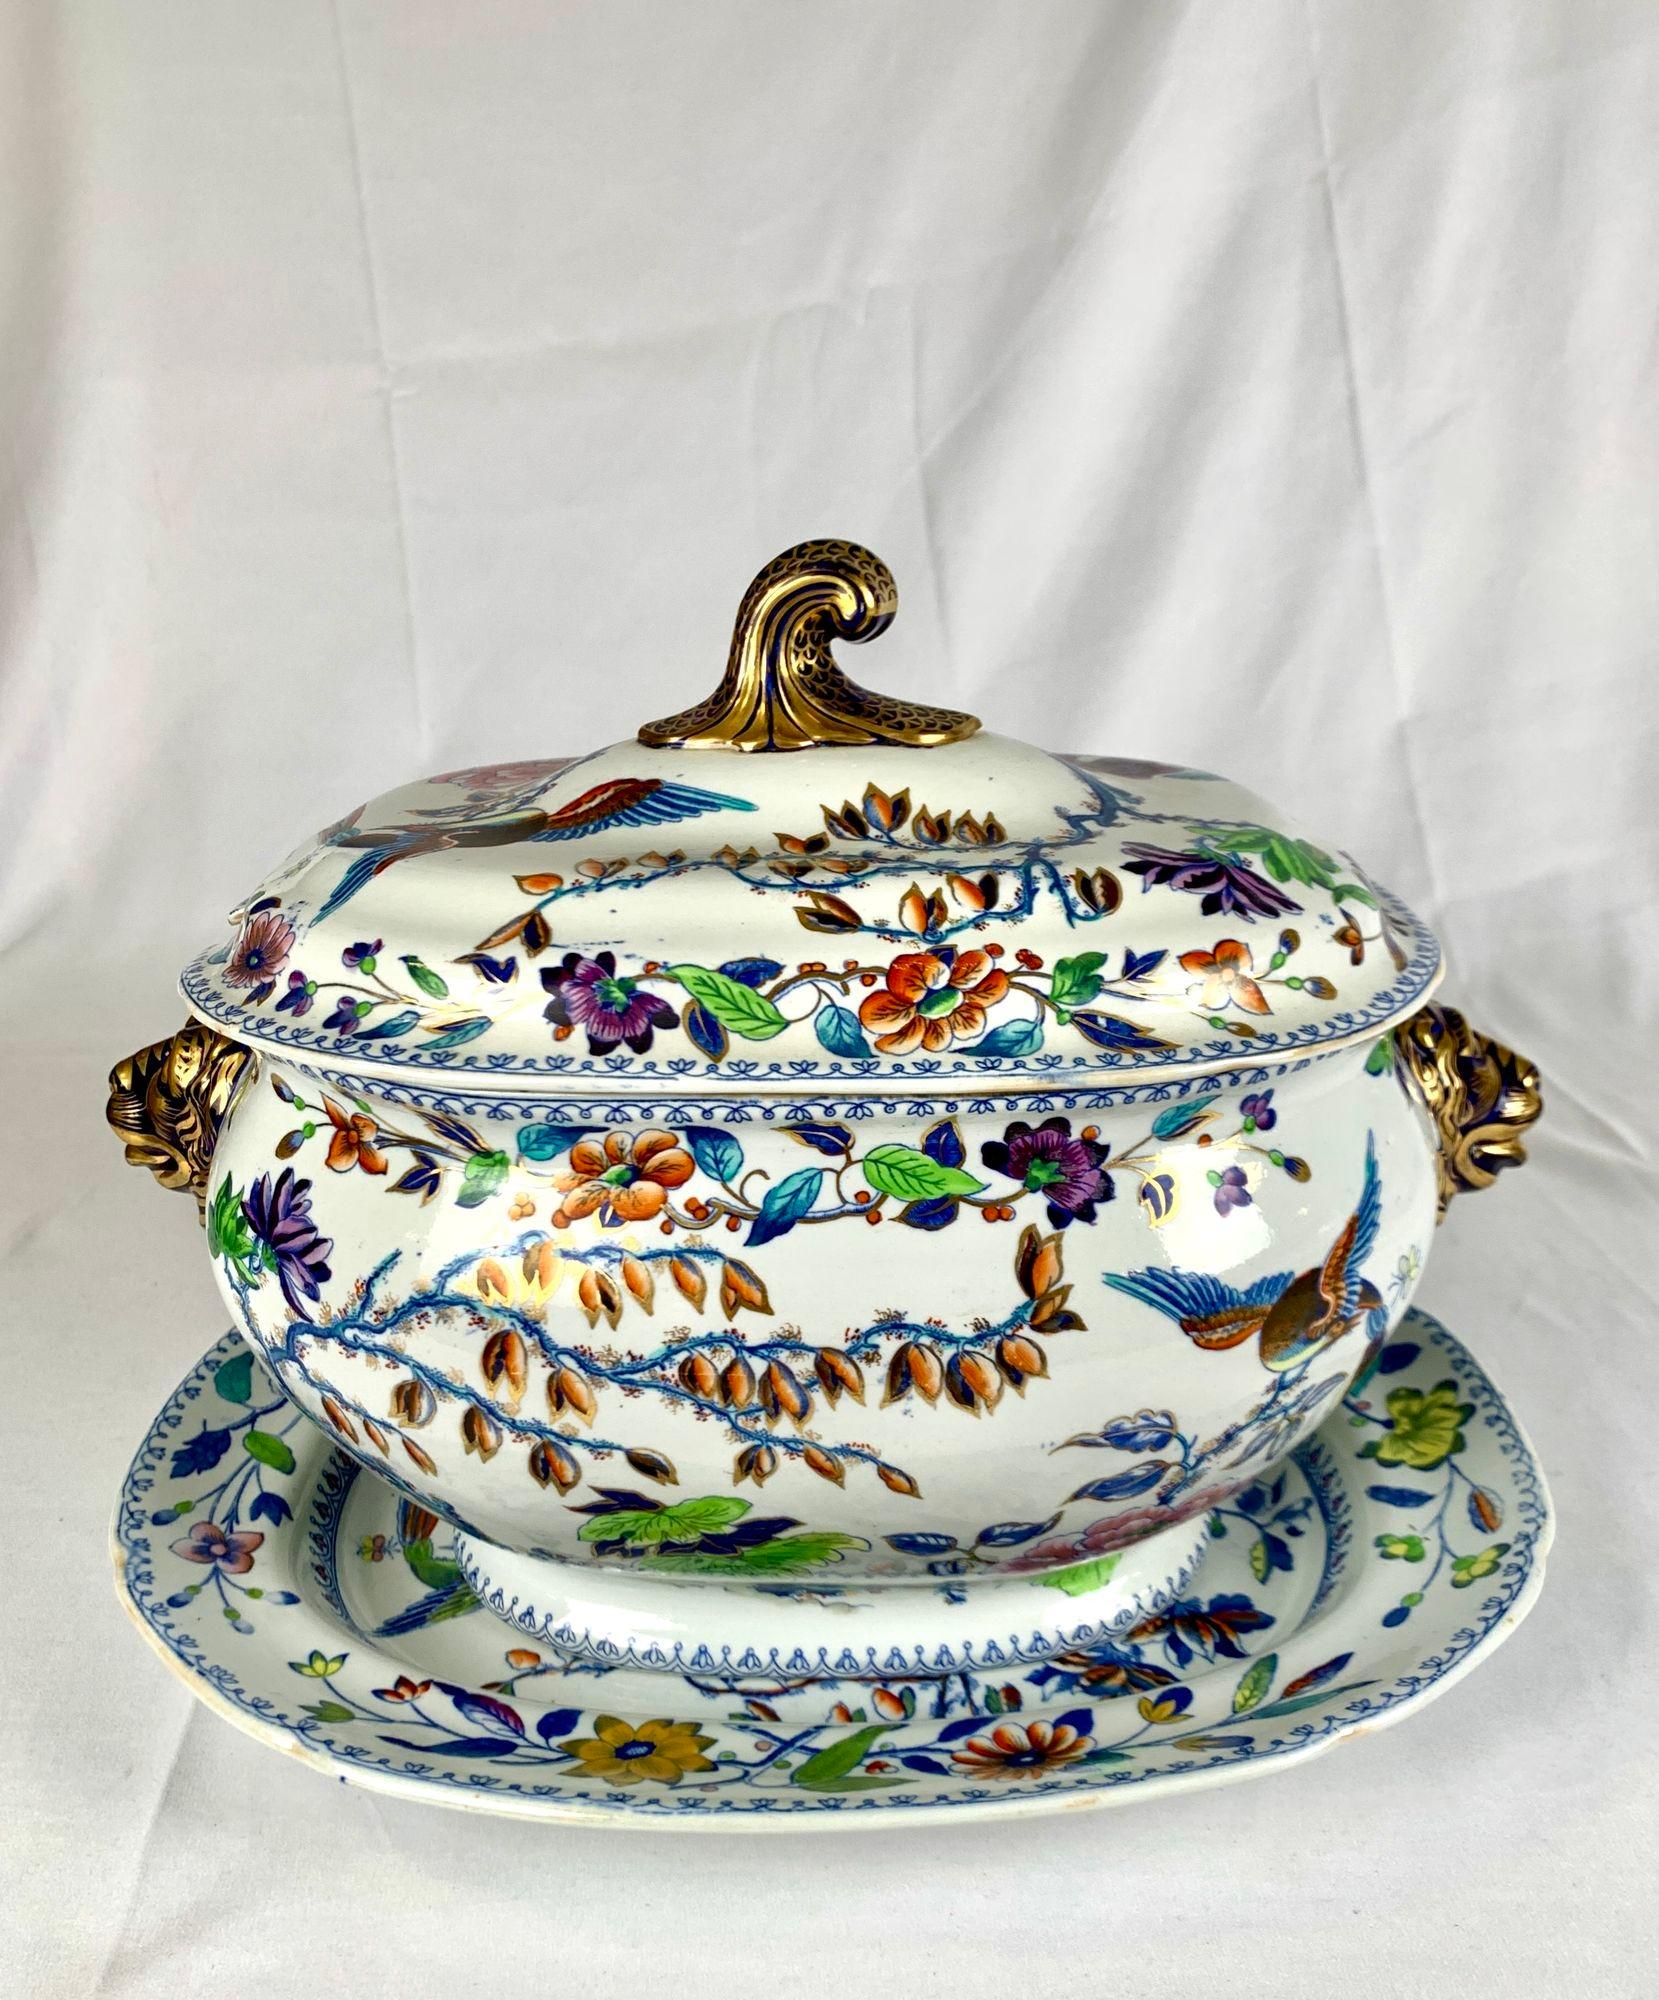 Ironstone Large Soup Tureen Flying Bird Pattern Made in England Circa 1815 by Davenport